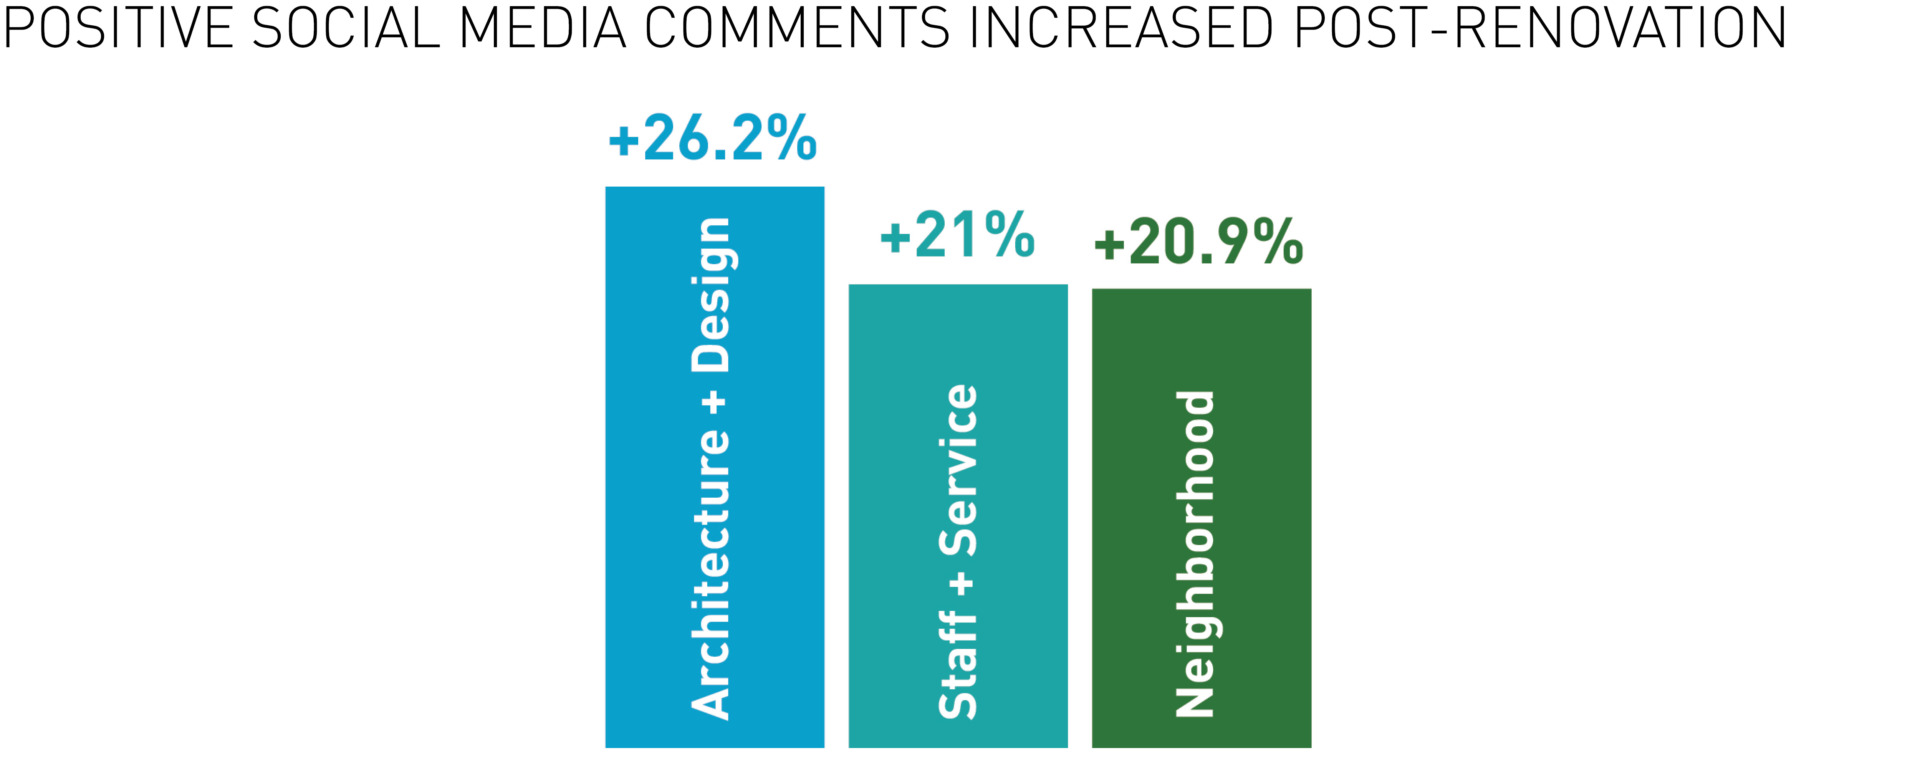 Bar chart showing percentage increase in positive comments post-renovation of CSC space.